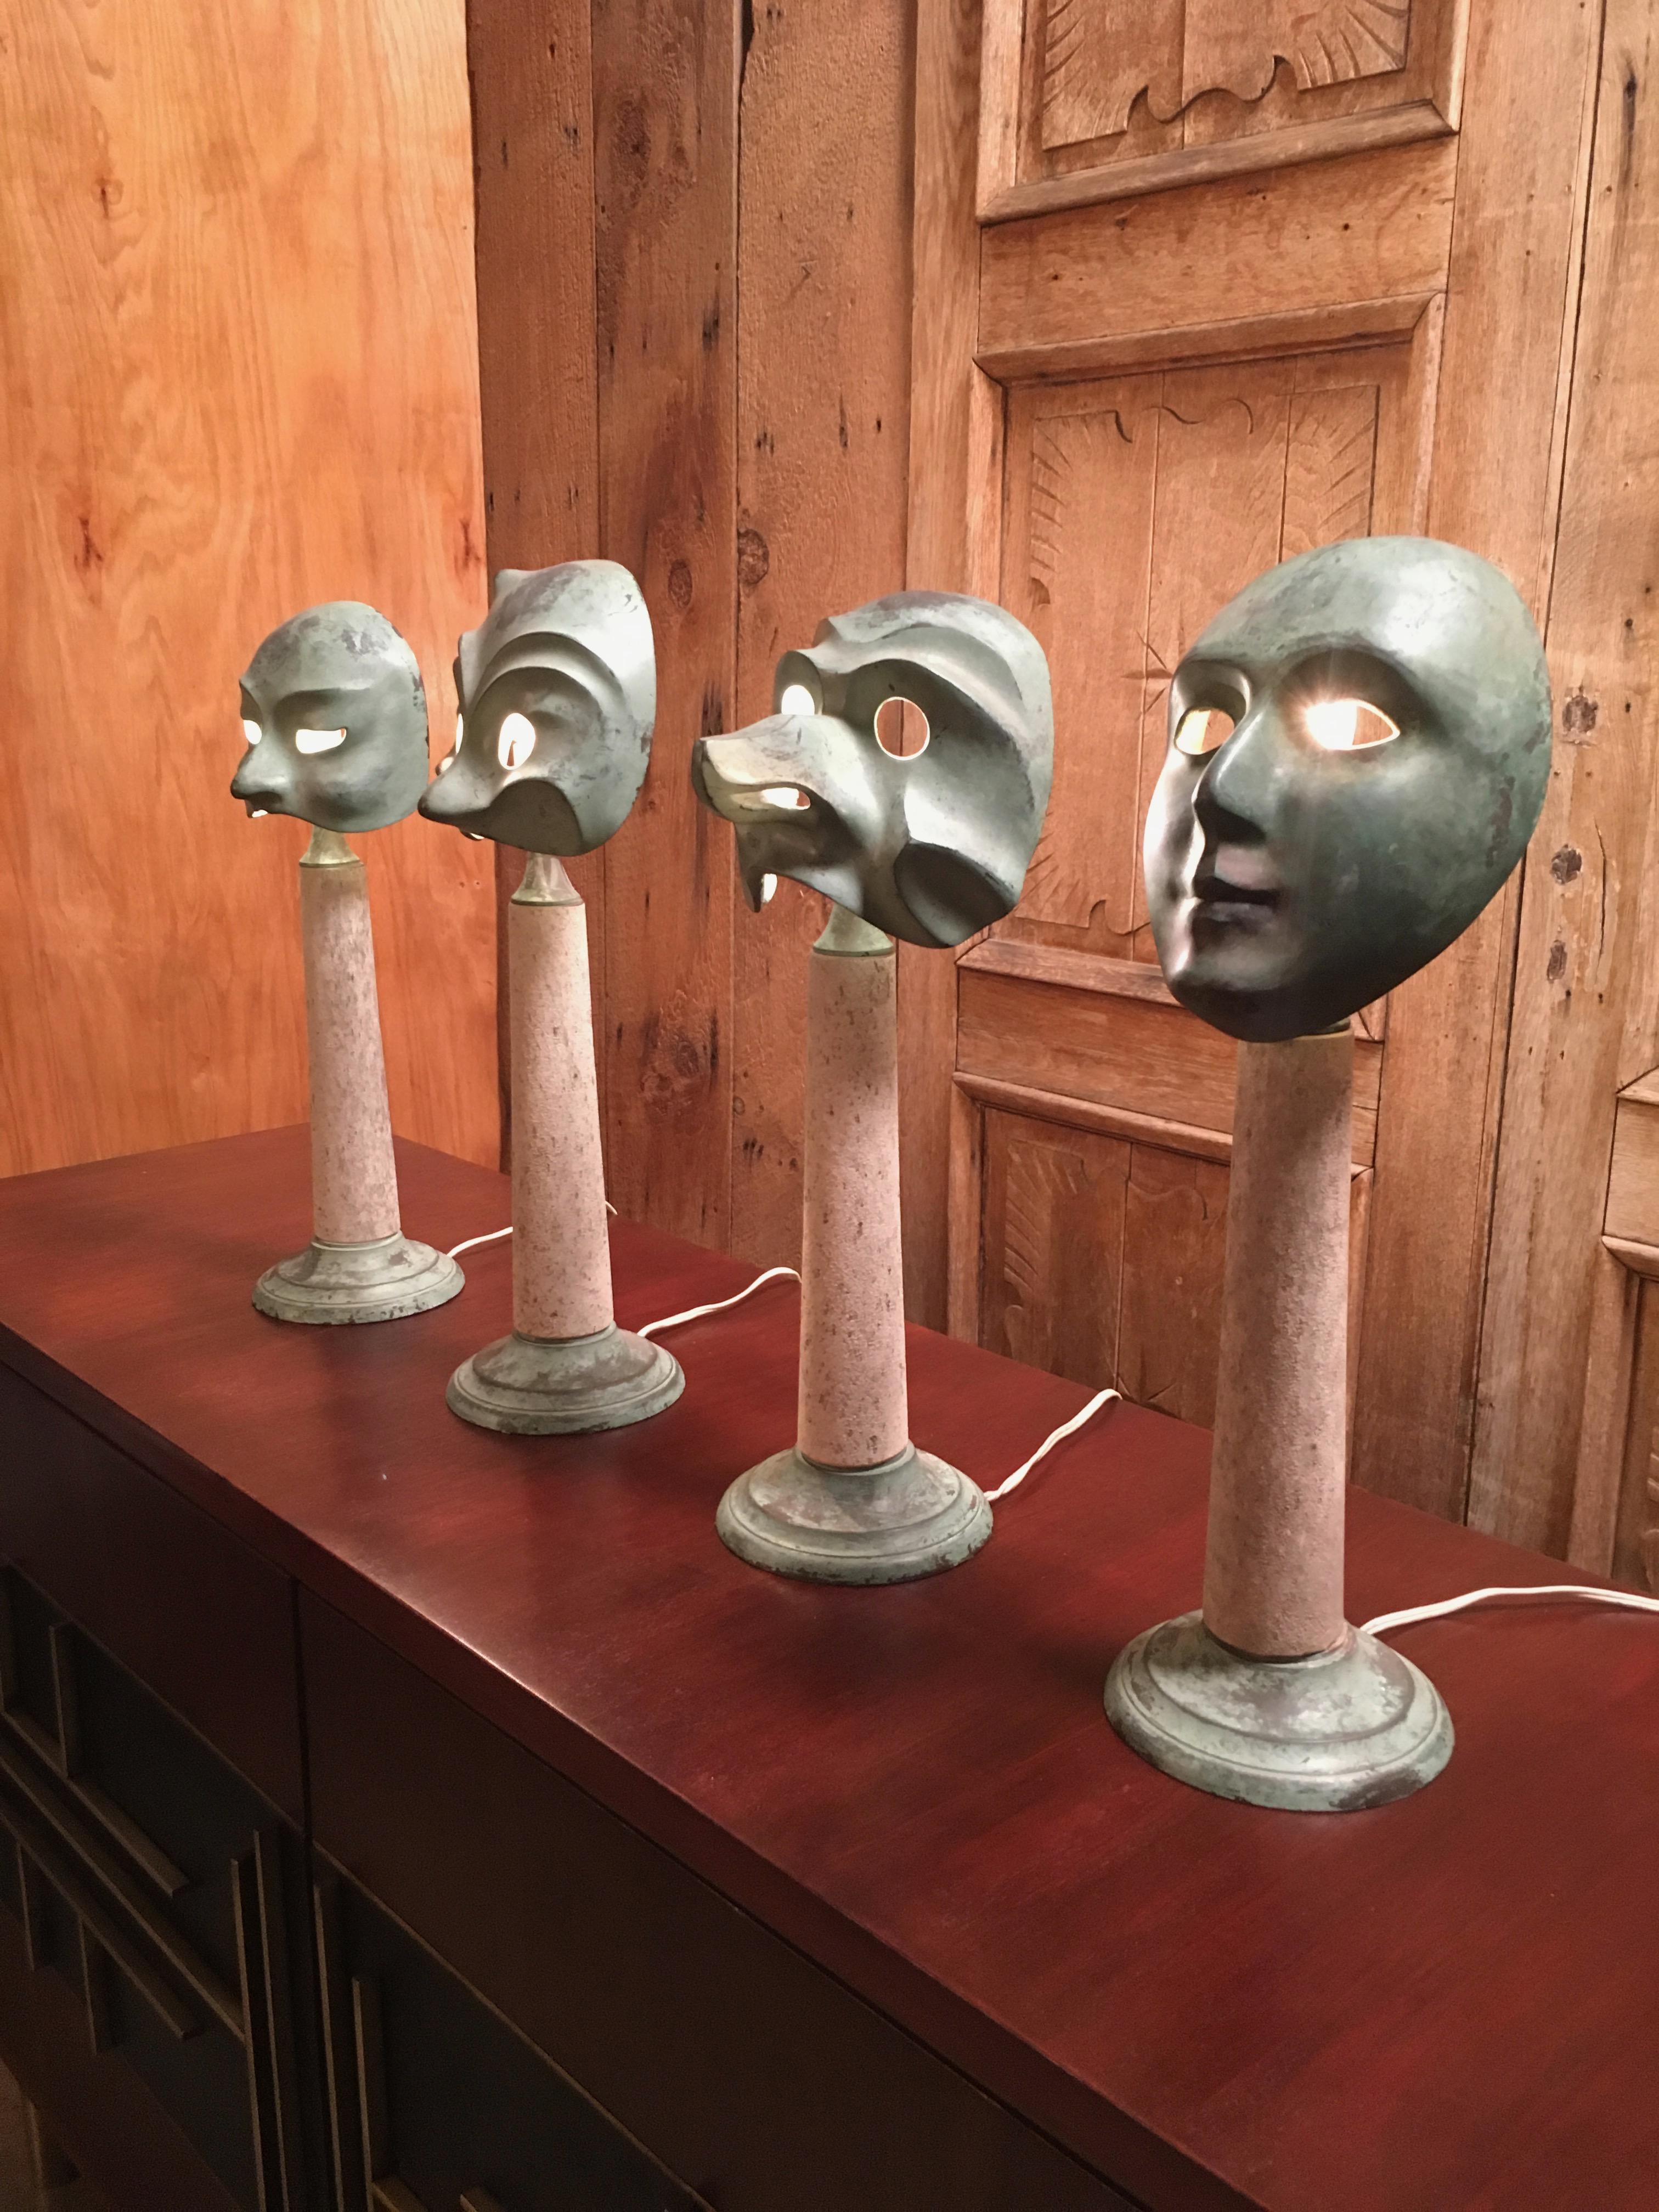 Theater mask table lamps designed by Elin Raaberg Nielsen for Seguso Vetri D’Arte from the “Le Maschere” series. All pieces were crafted during the 1970s in Murano, Italy in antique patinated bronze.

Measurements (left to right):
Oriental 18.75